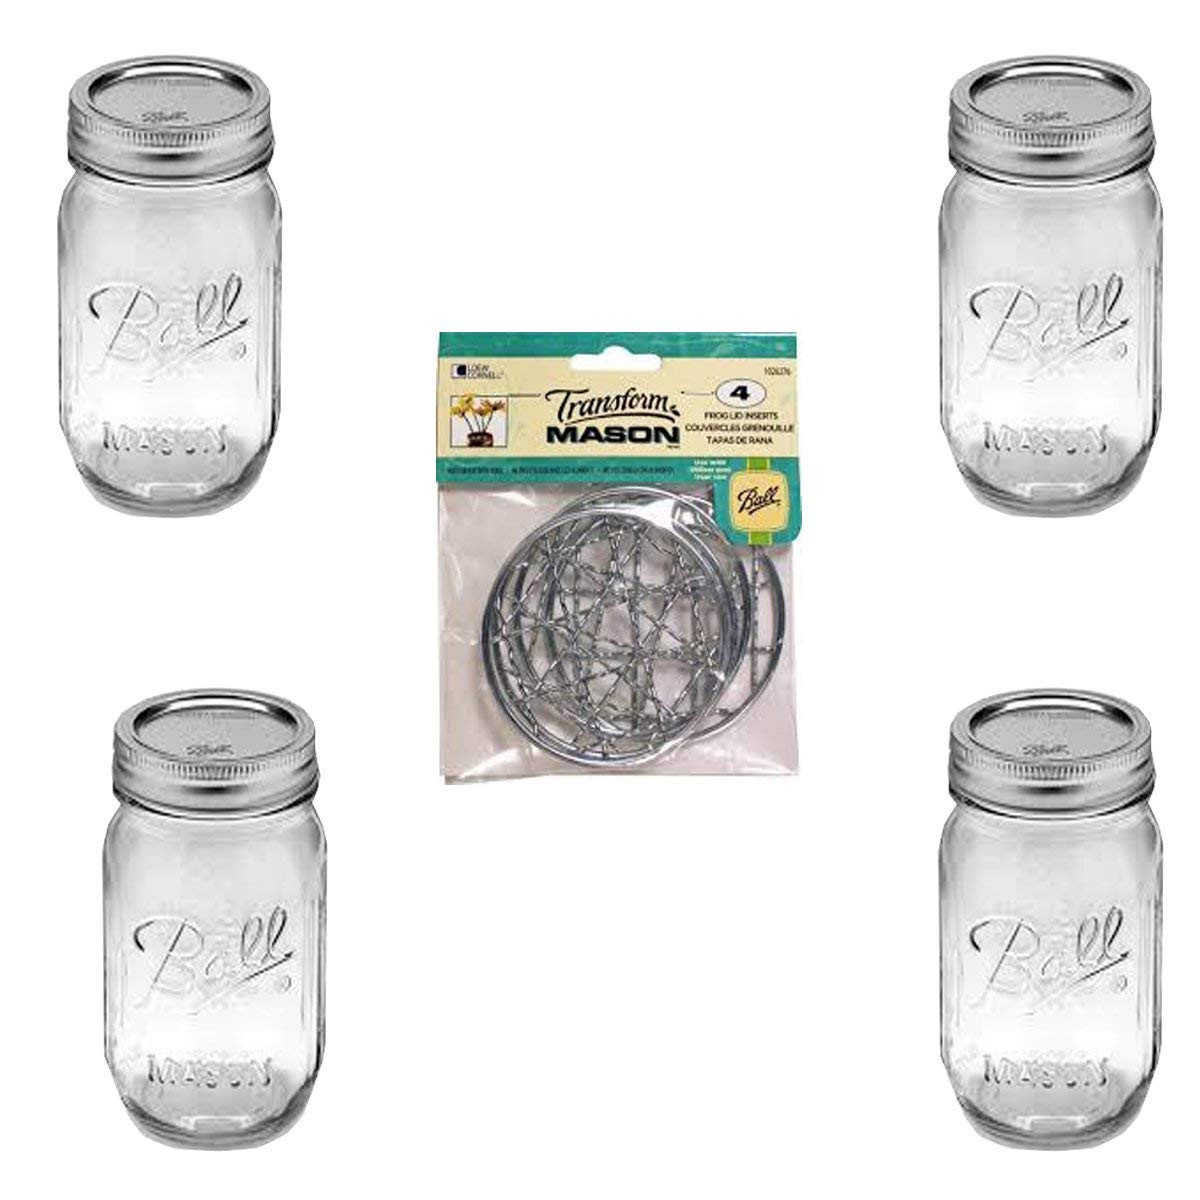 20 Nice Mason Jar Vases with Ribbon 2022 free download mason jar vases with ribbon of amazon com 4 mason jars with 4 frog lid inserts regular mouth pint with amazon com 4 mason jars with 4 frog lid inserts regular mouth pint 16 oz bundle clear k